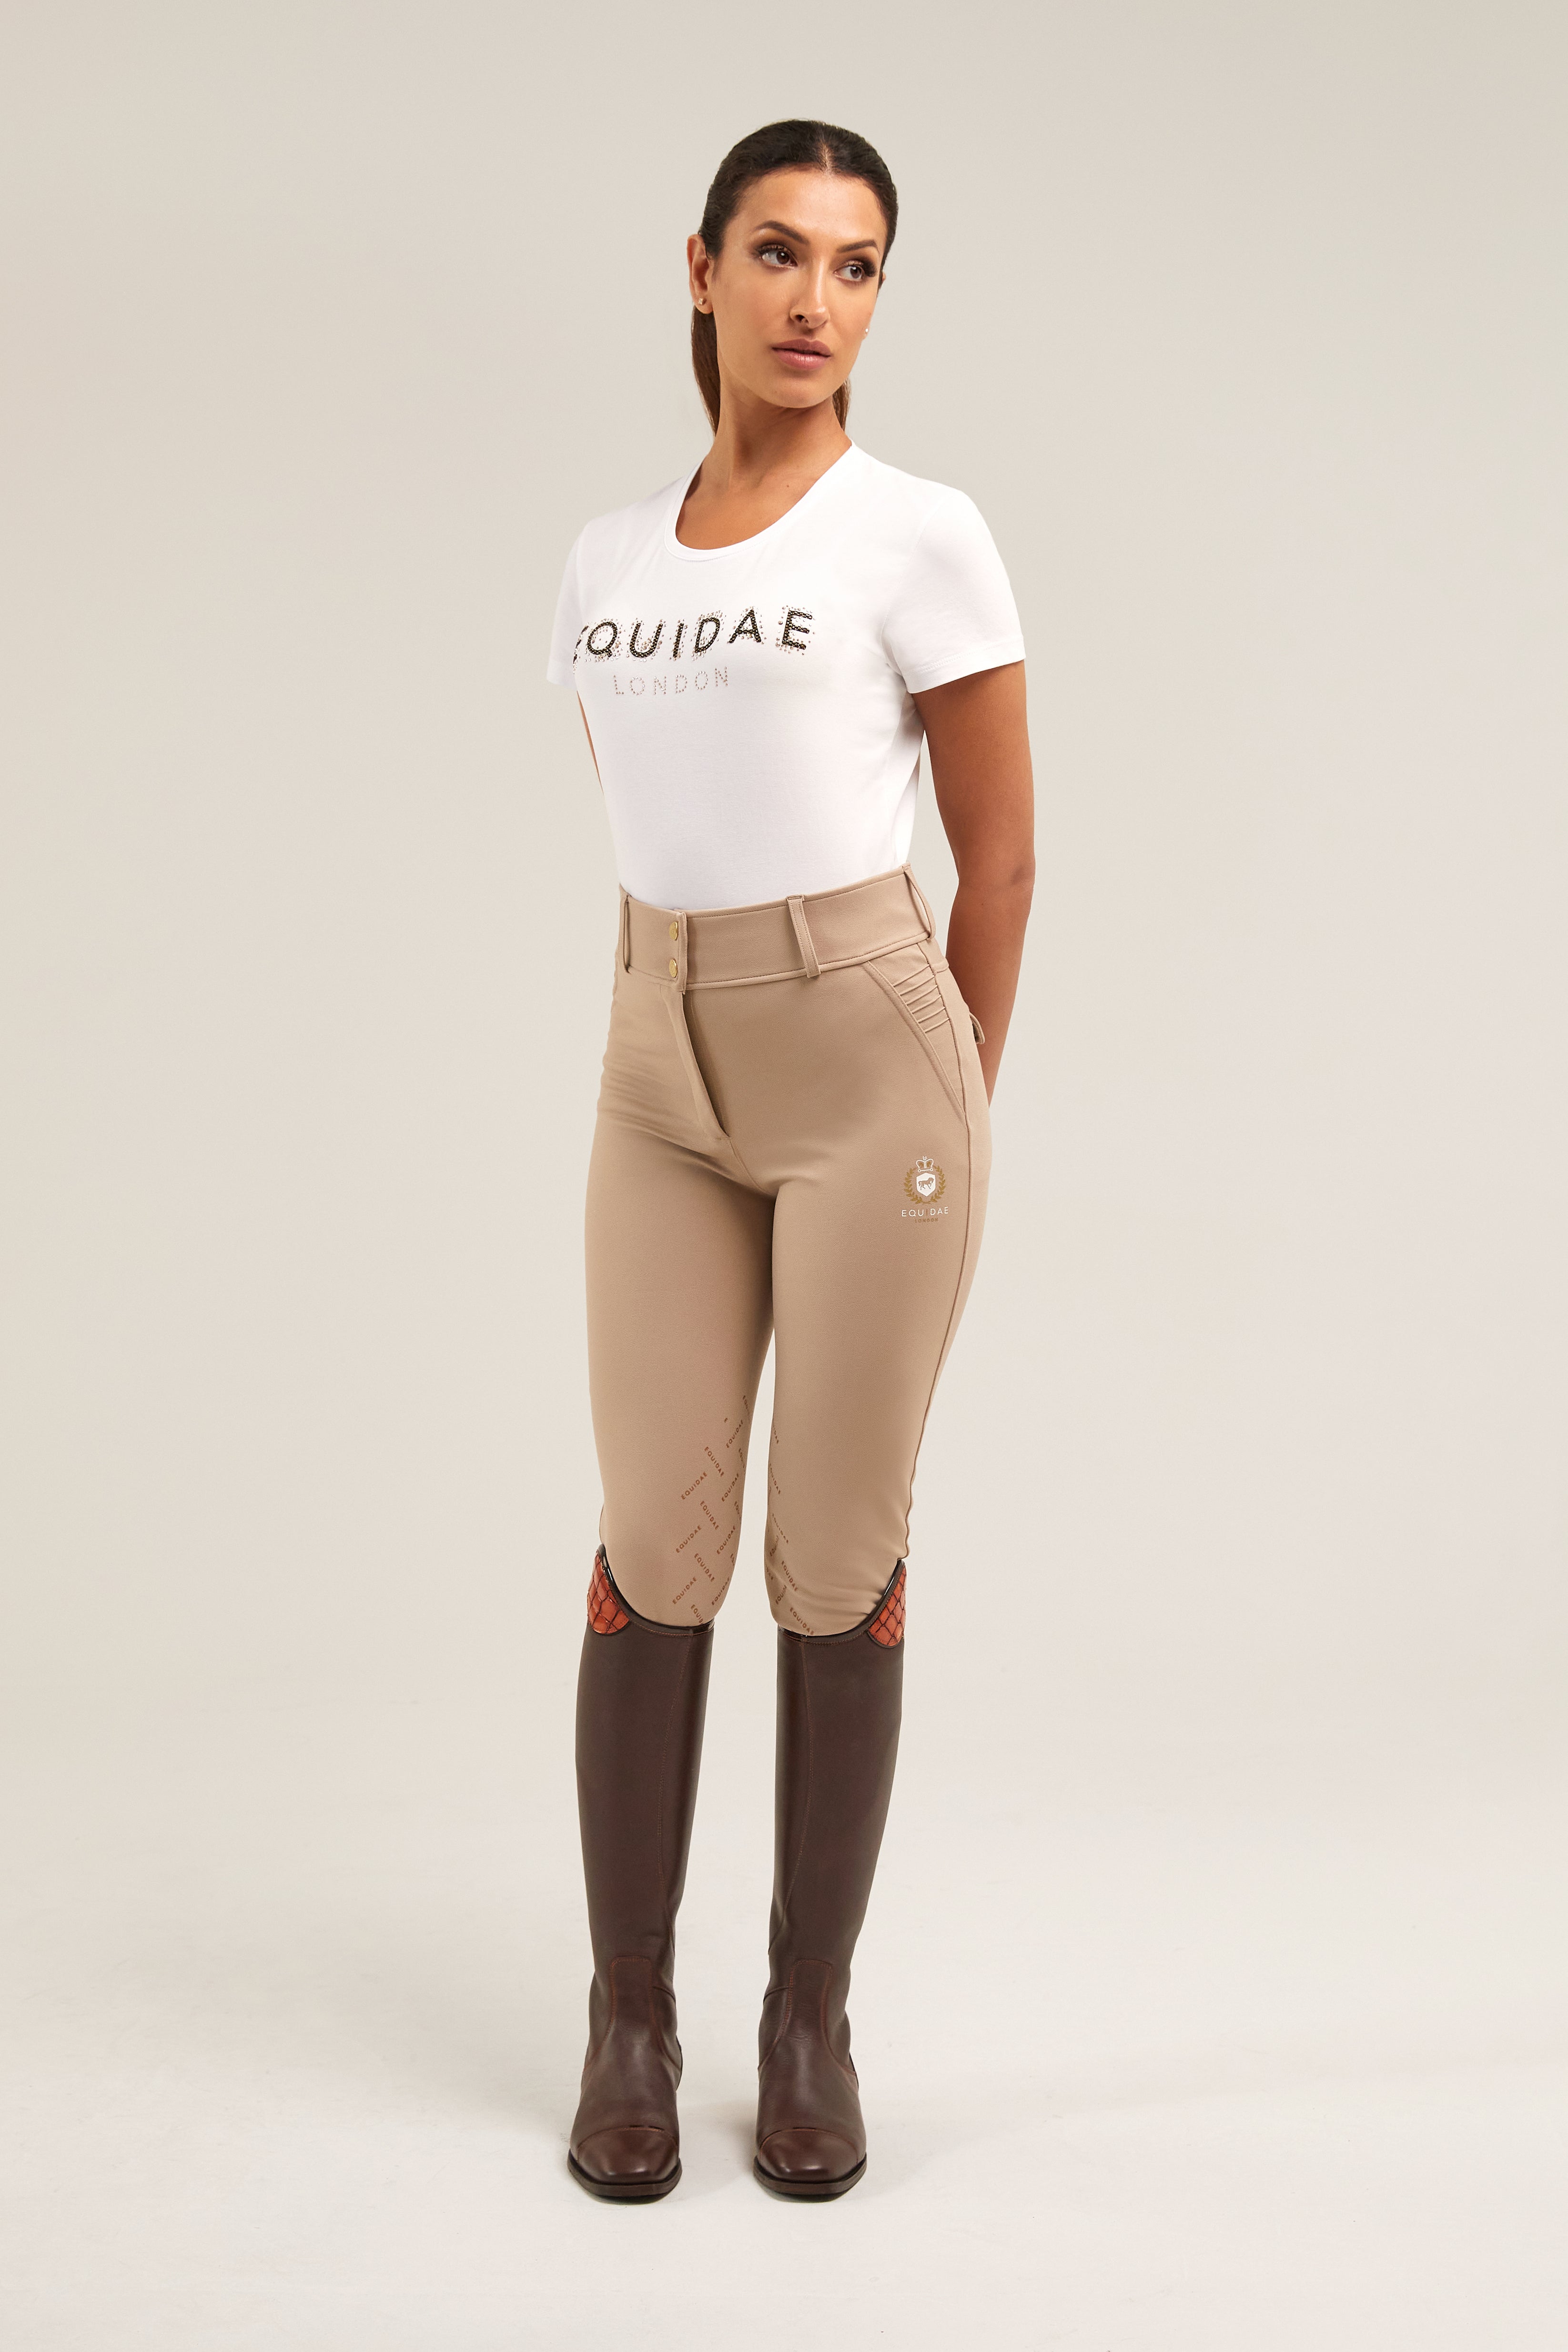 PENELOPE High Rise Knee Grip Breeches in Taupe – Equidae London